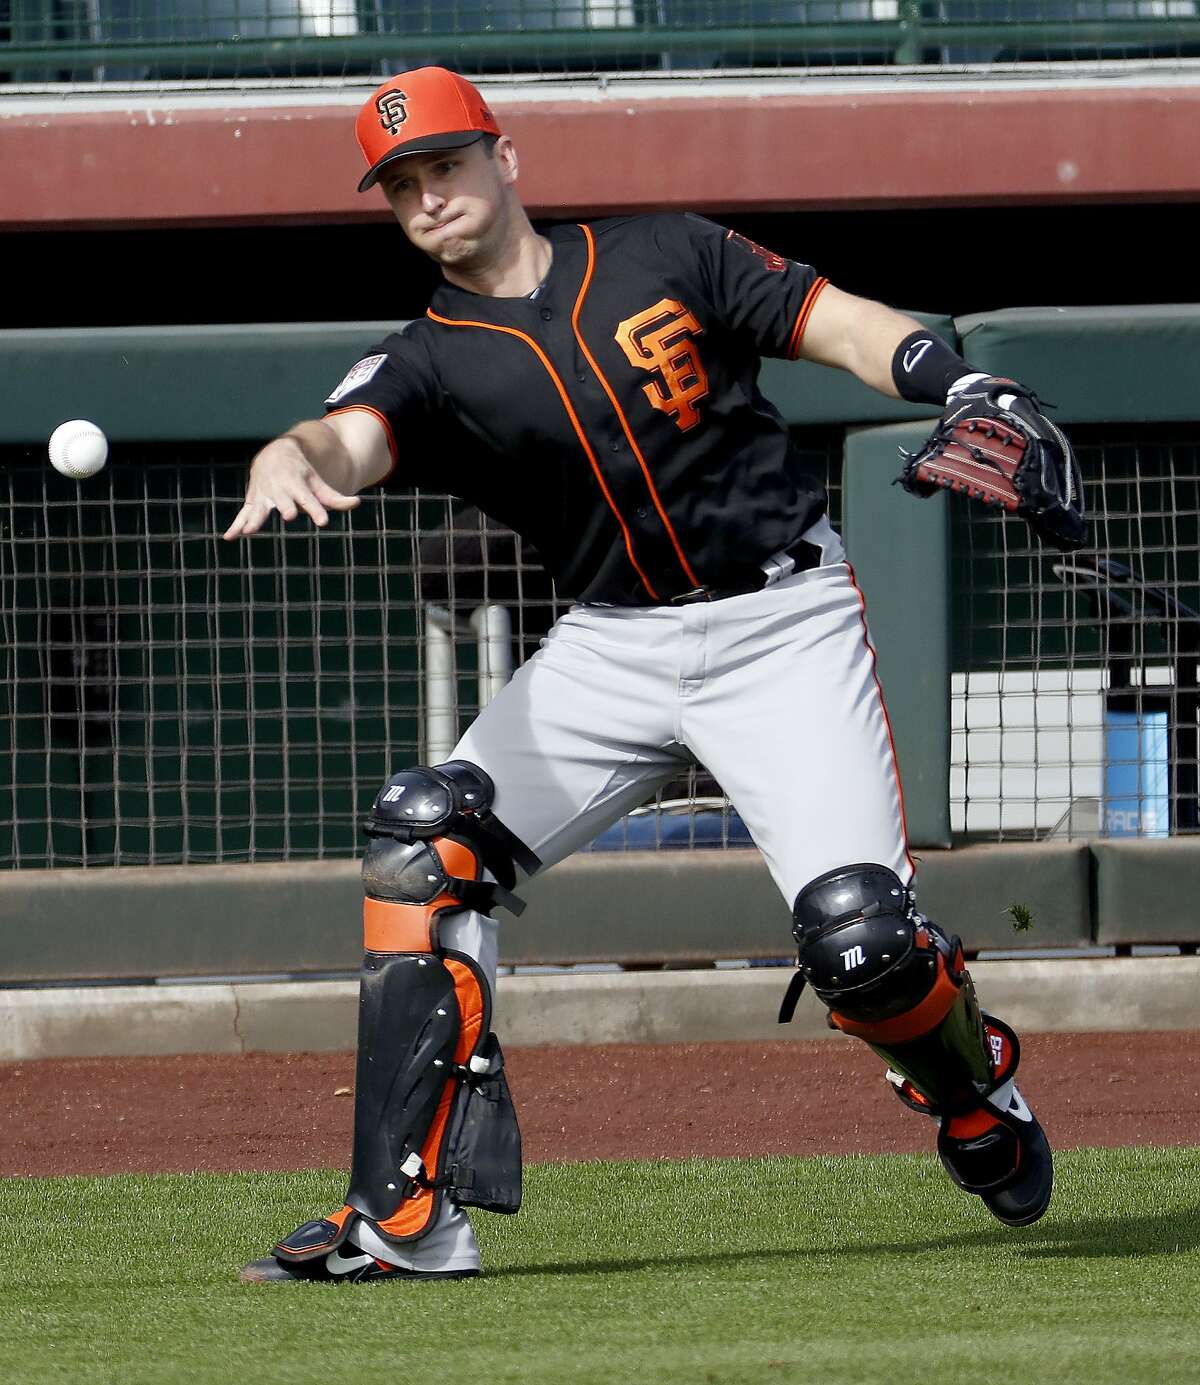 Buster Posey ready to move on from baseball, says farewell